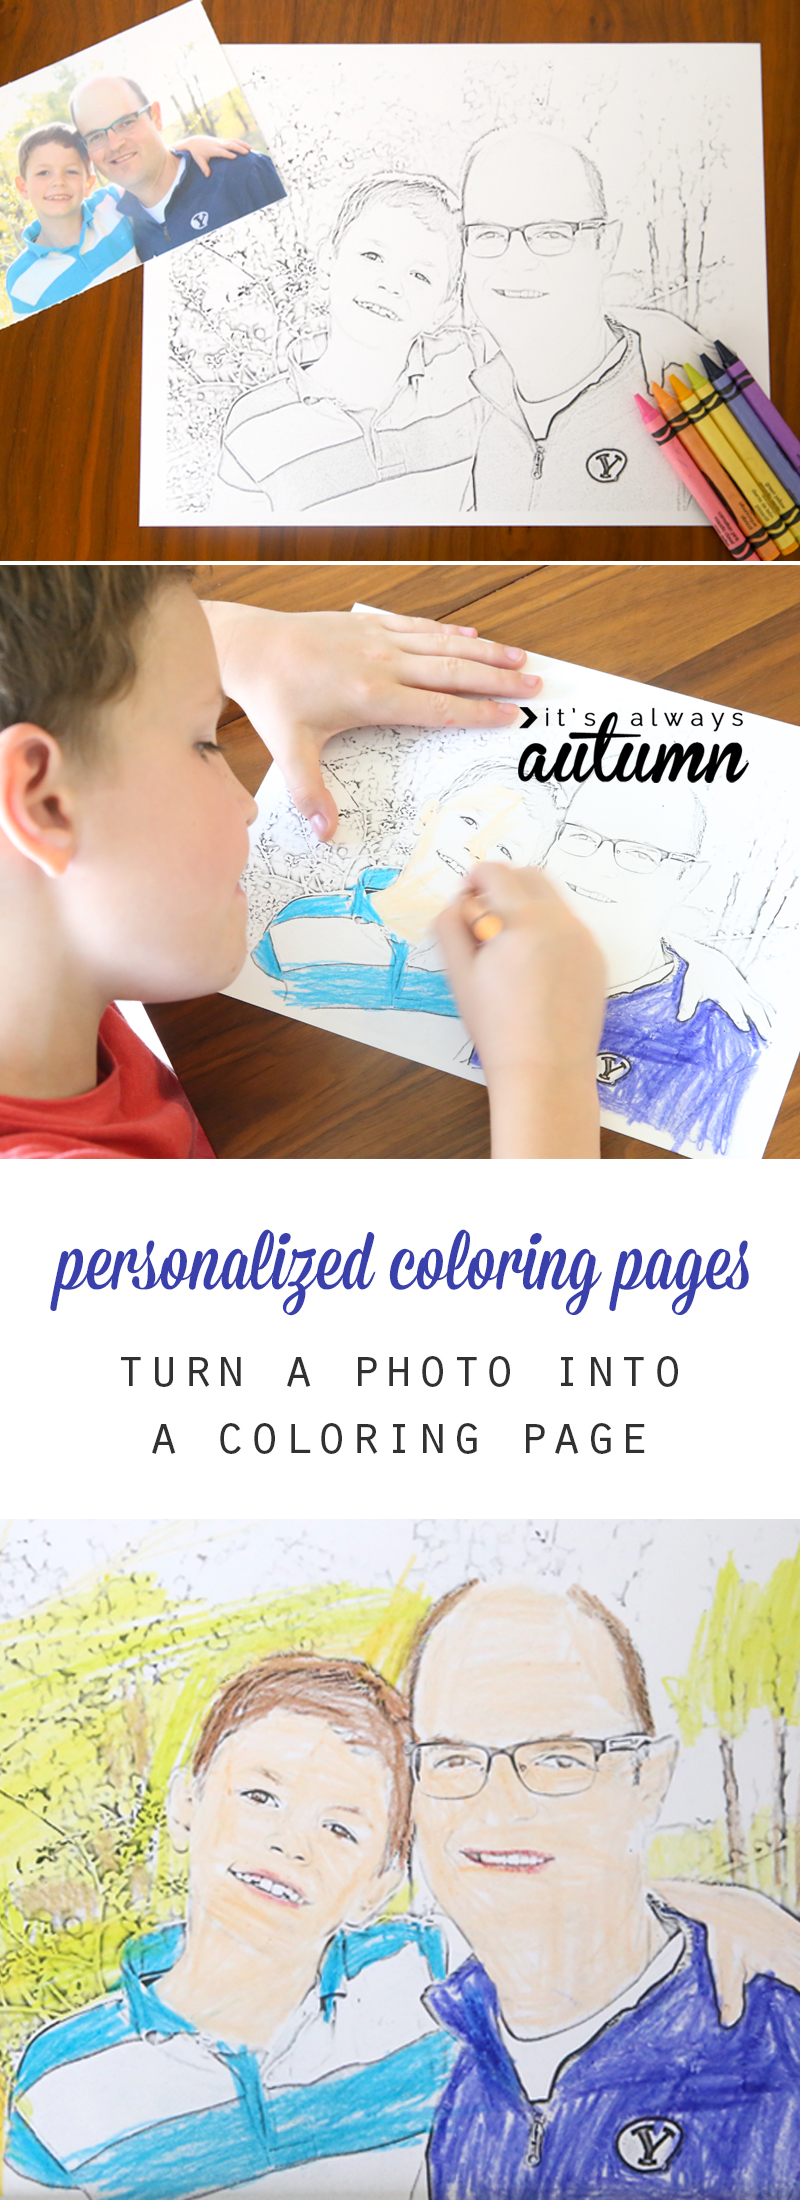 make coloring pages using photoshop - photo #25